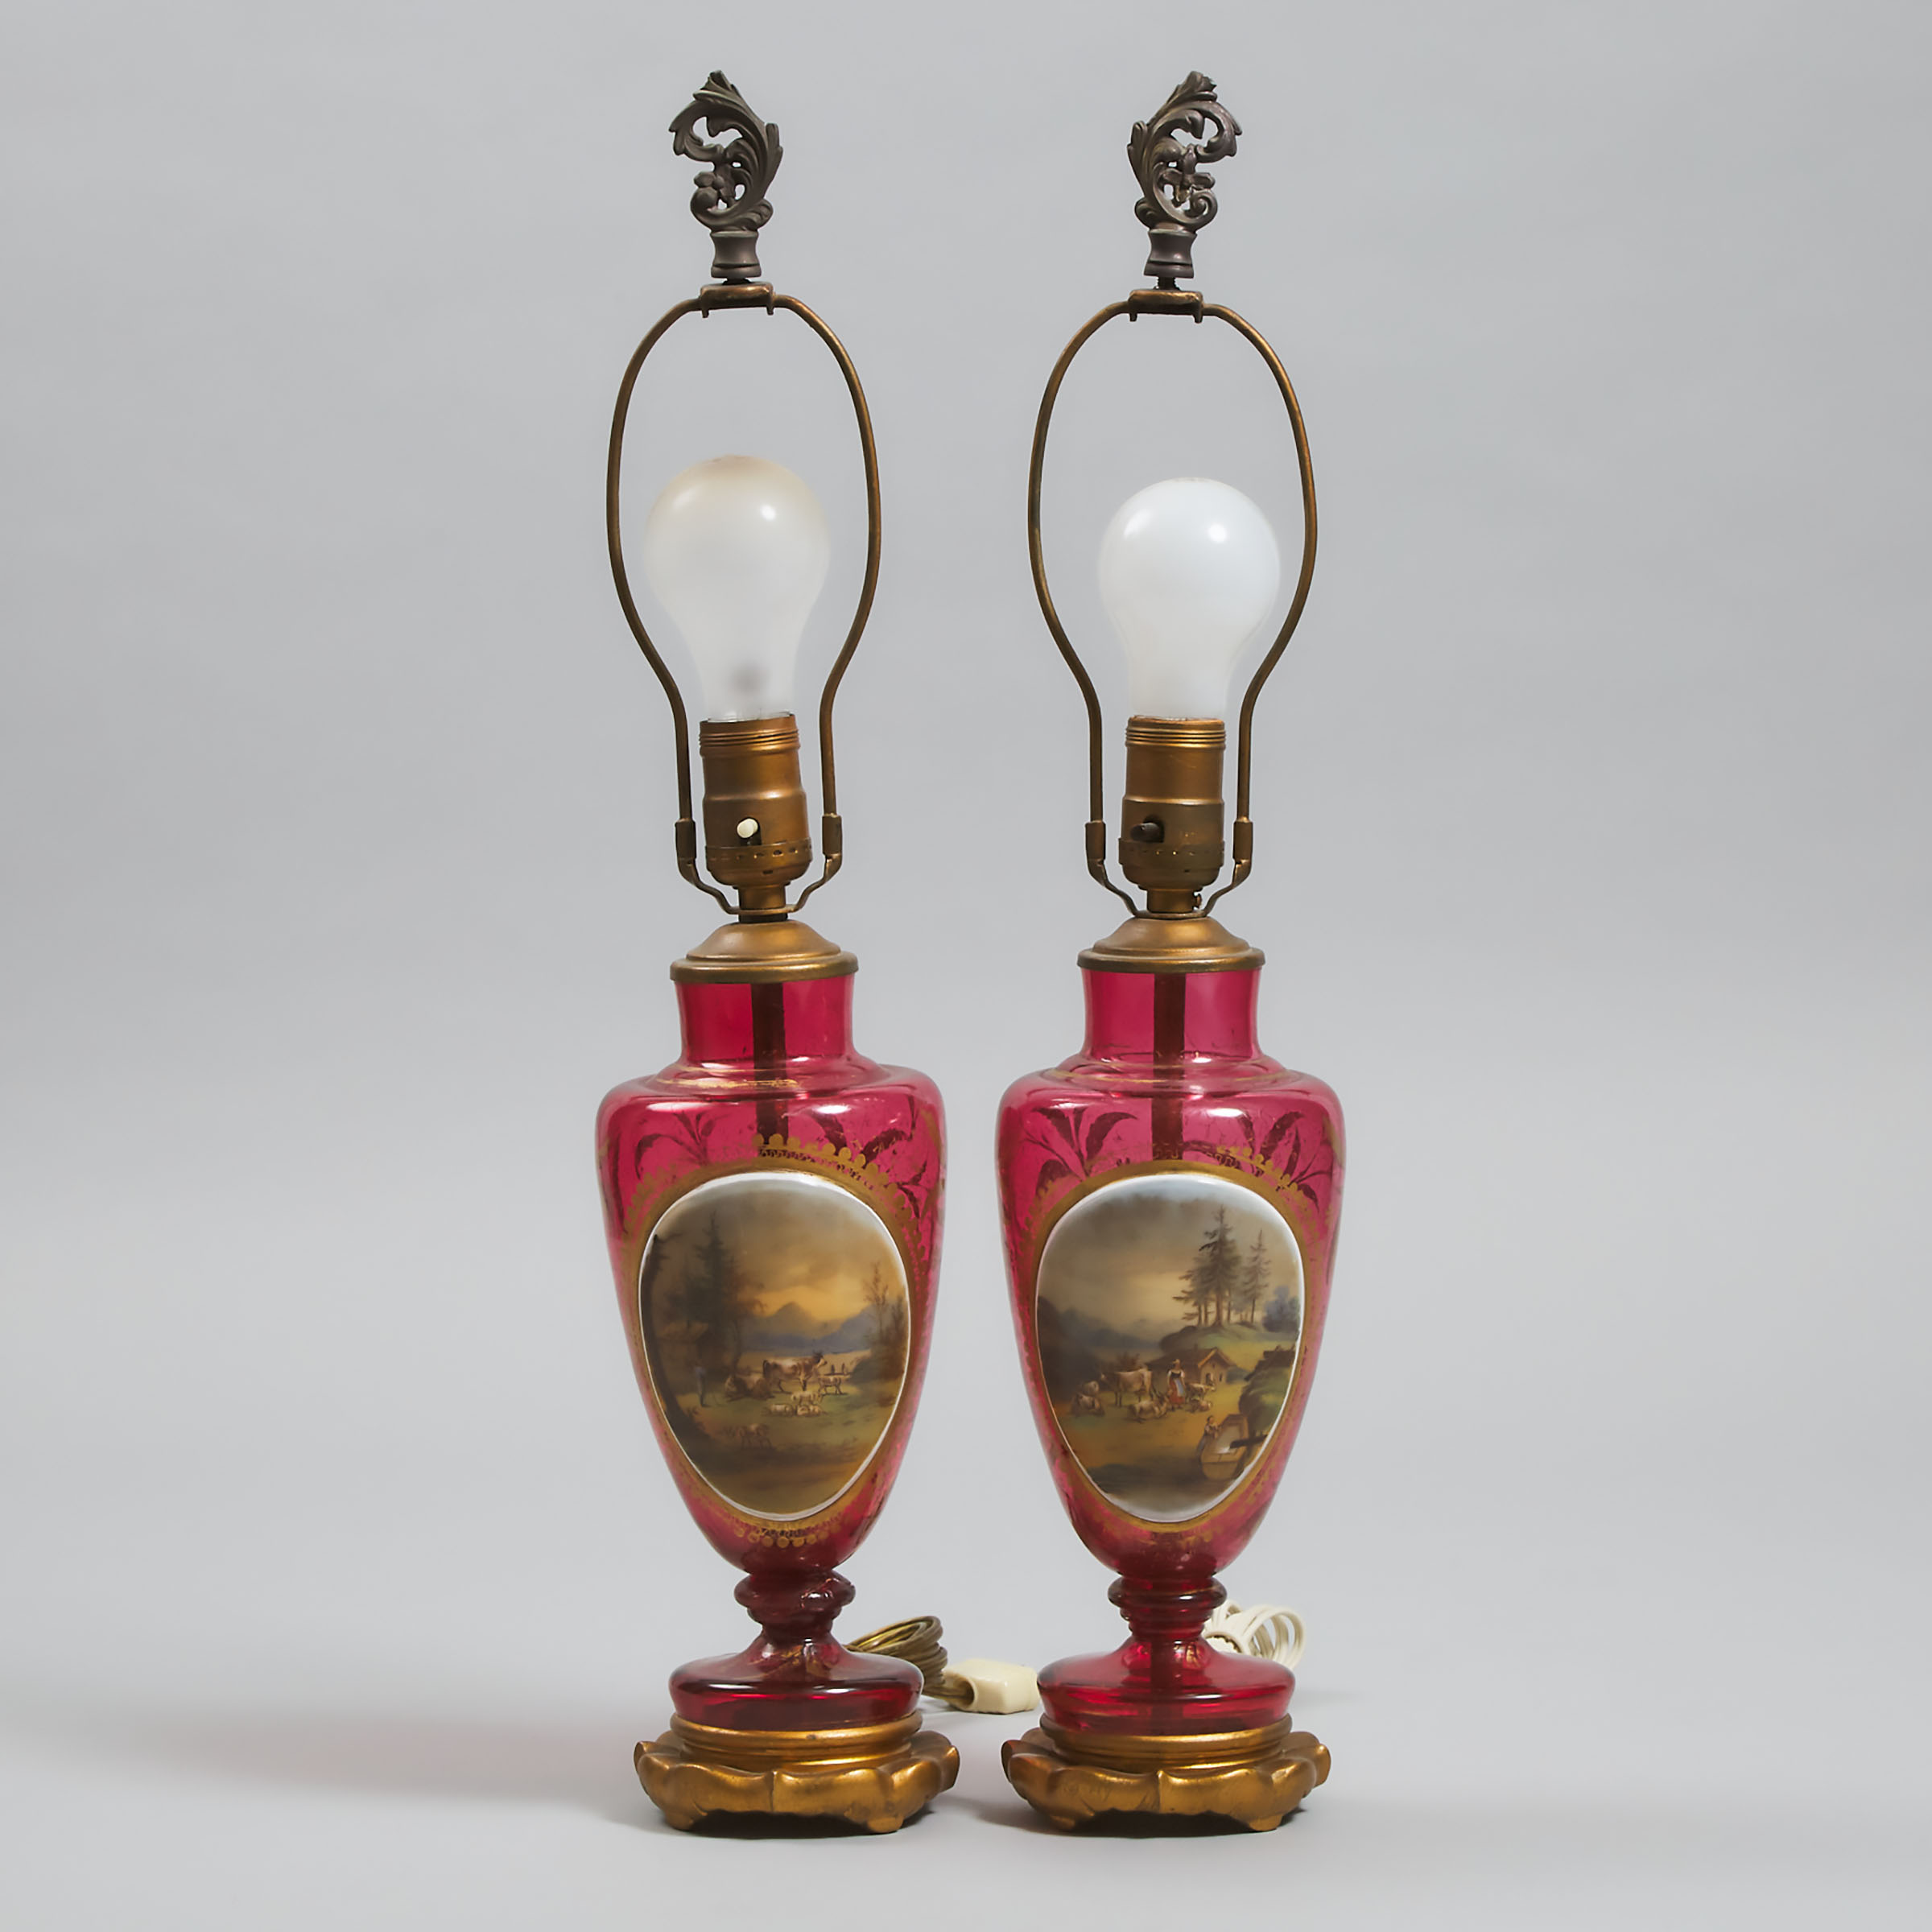 Pair of Bohemian Overlaid, Enameled and Gilt Red Glass Vases as Table Lamps, late 19th century